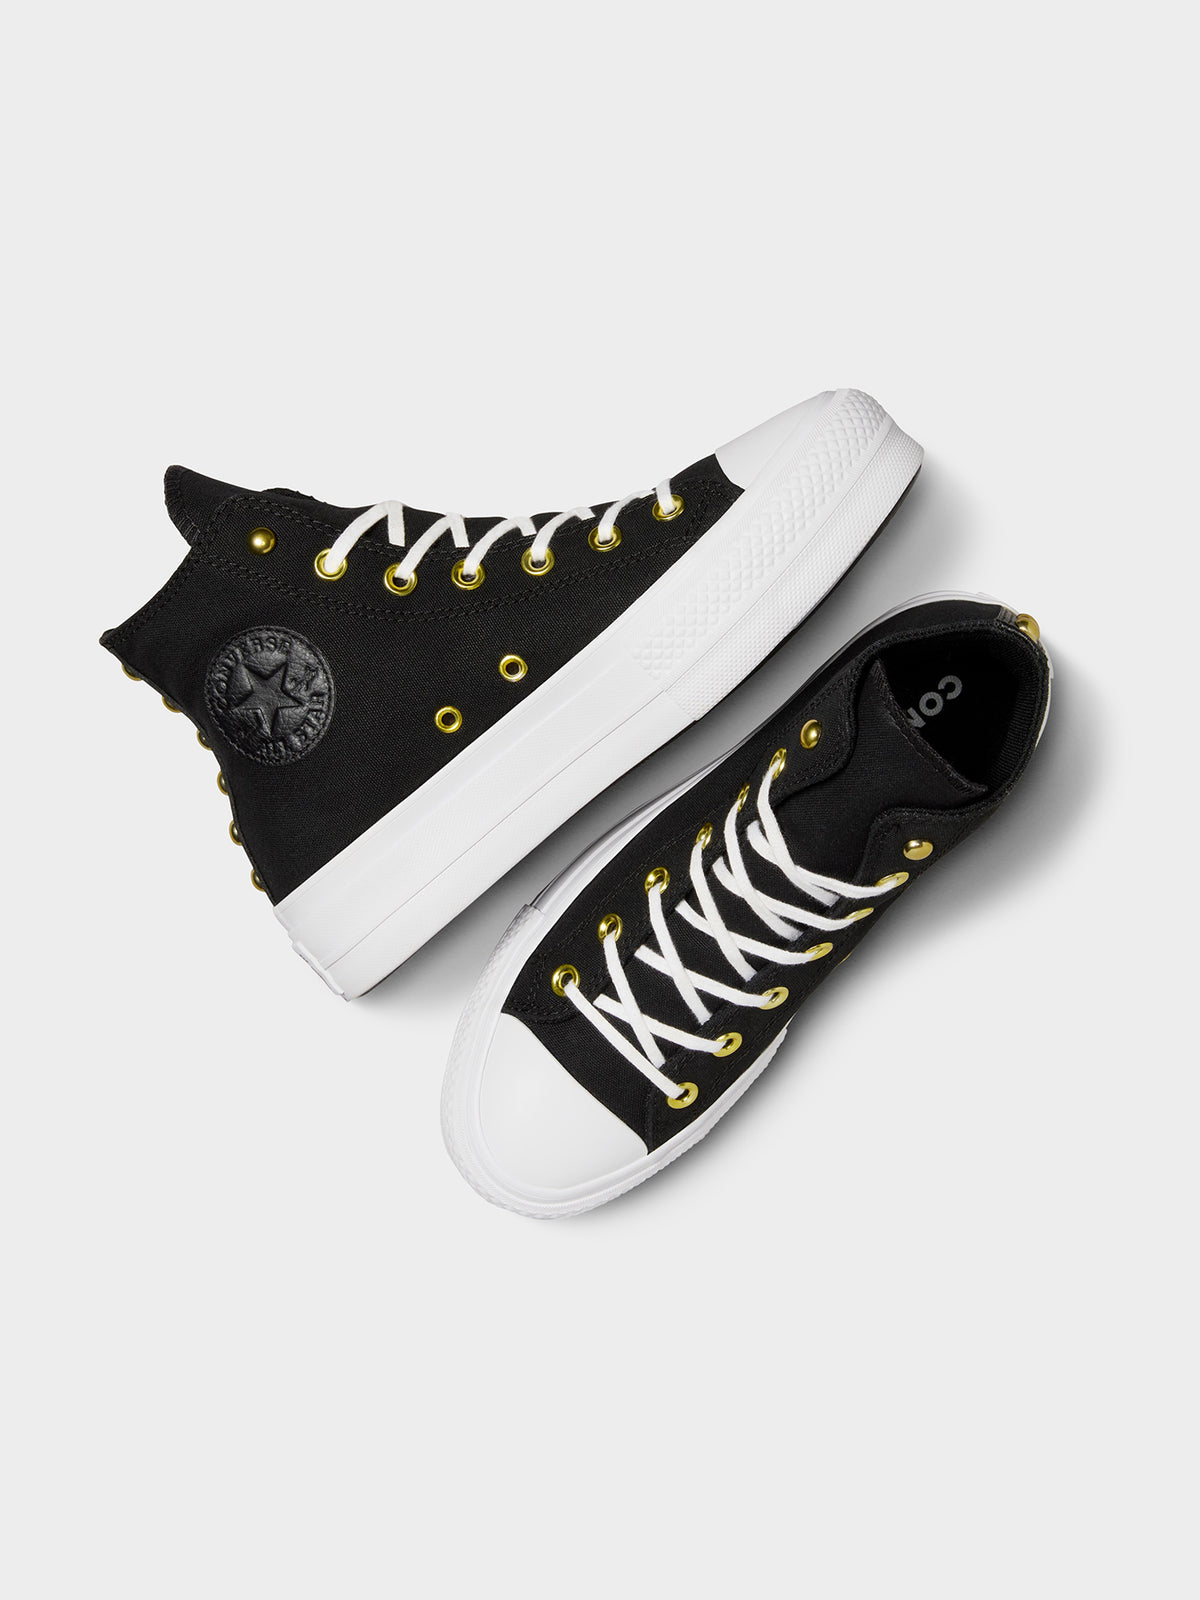 Womens Chuck Taylor All Star Lift Star Studded High Top Sneakers in Black &amp; White